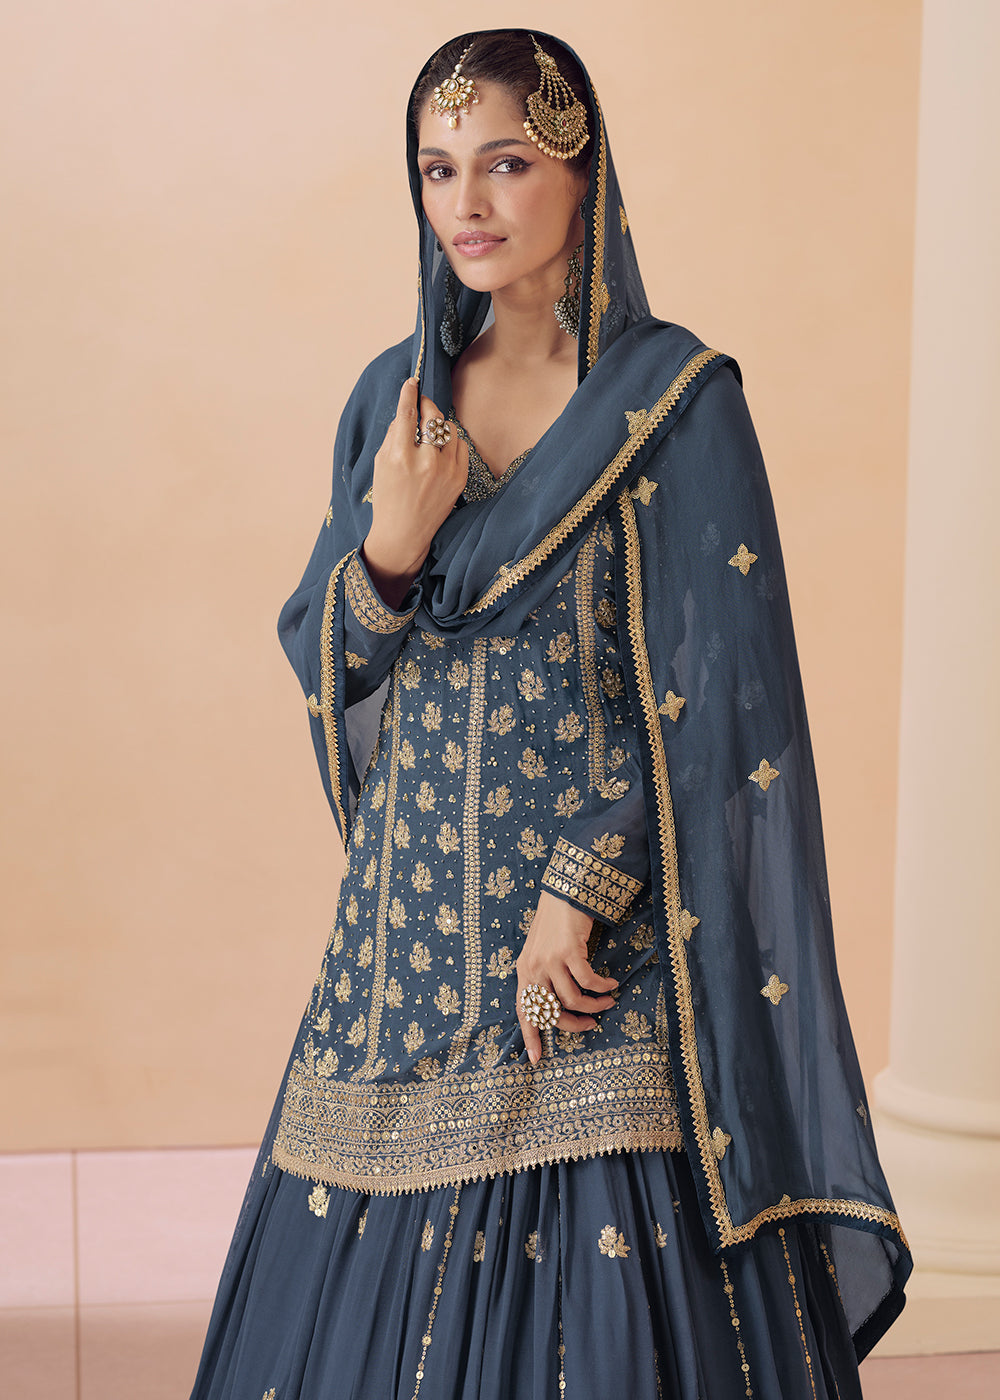 Buy Now Steel Blue Embroidered Georgette Lehenga Kurta Set Online in USA, UK, Canada & Worldwide at Empress Clothing. 